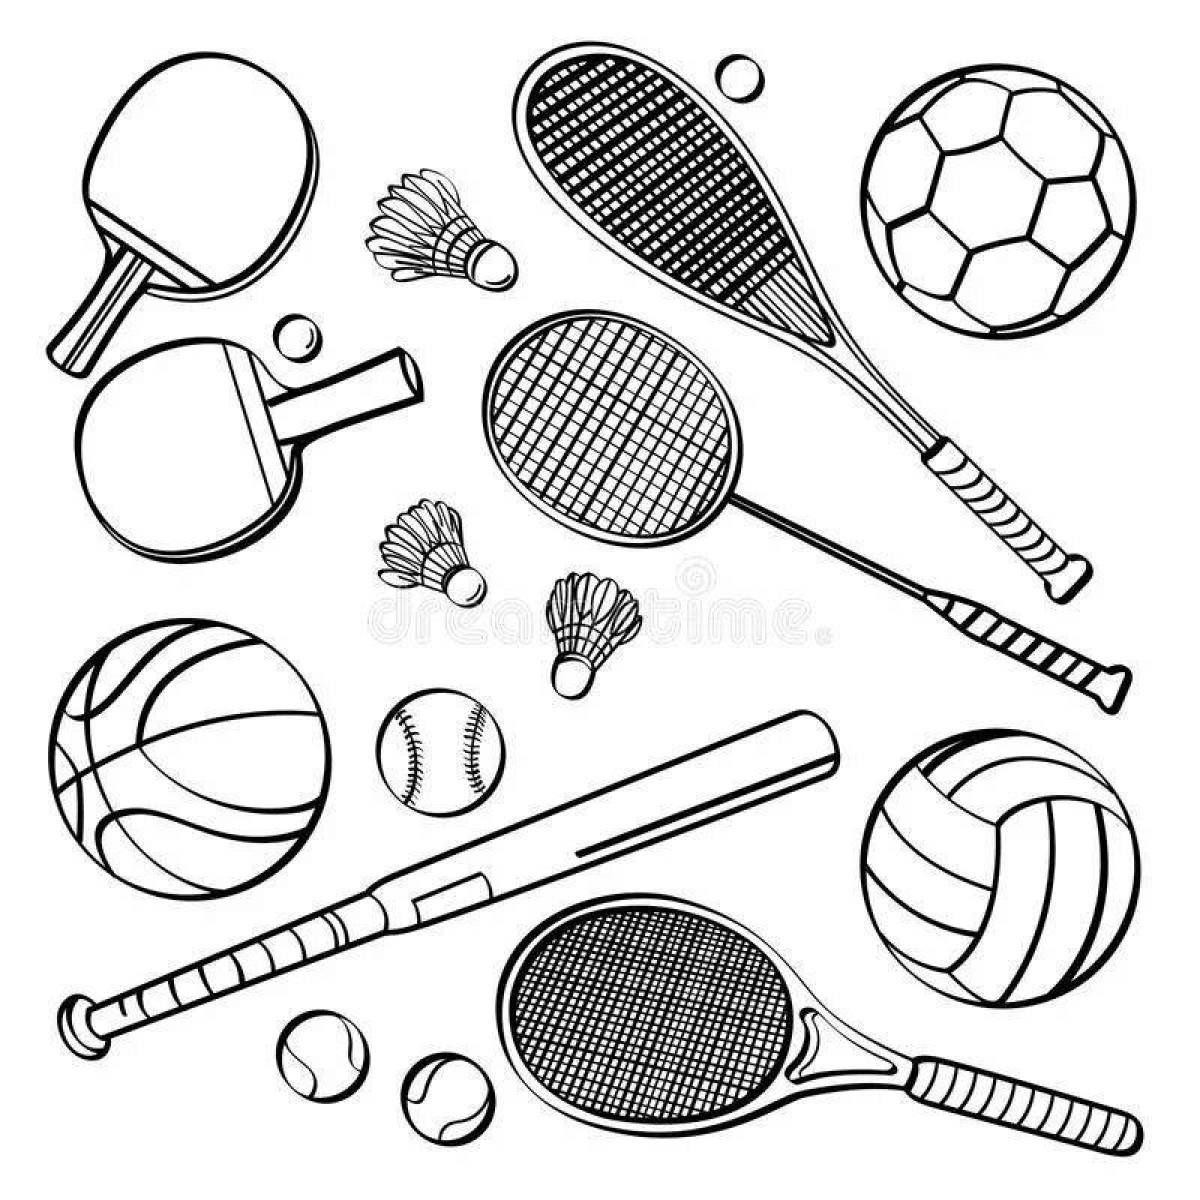 Live sports equipment coloring page